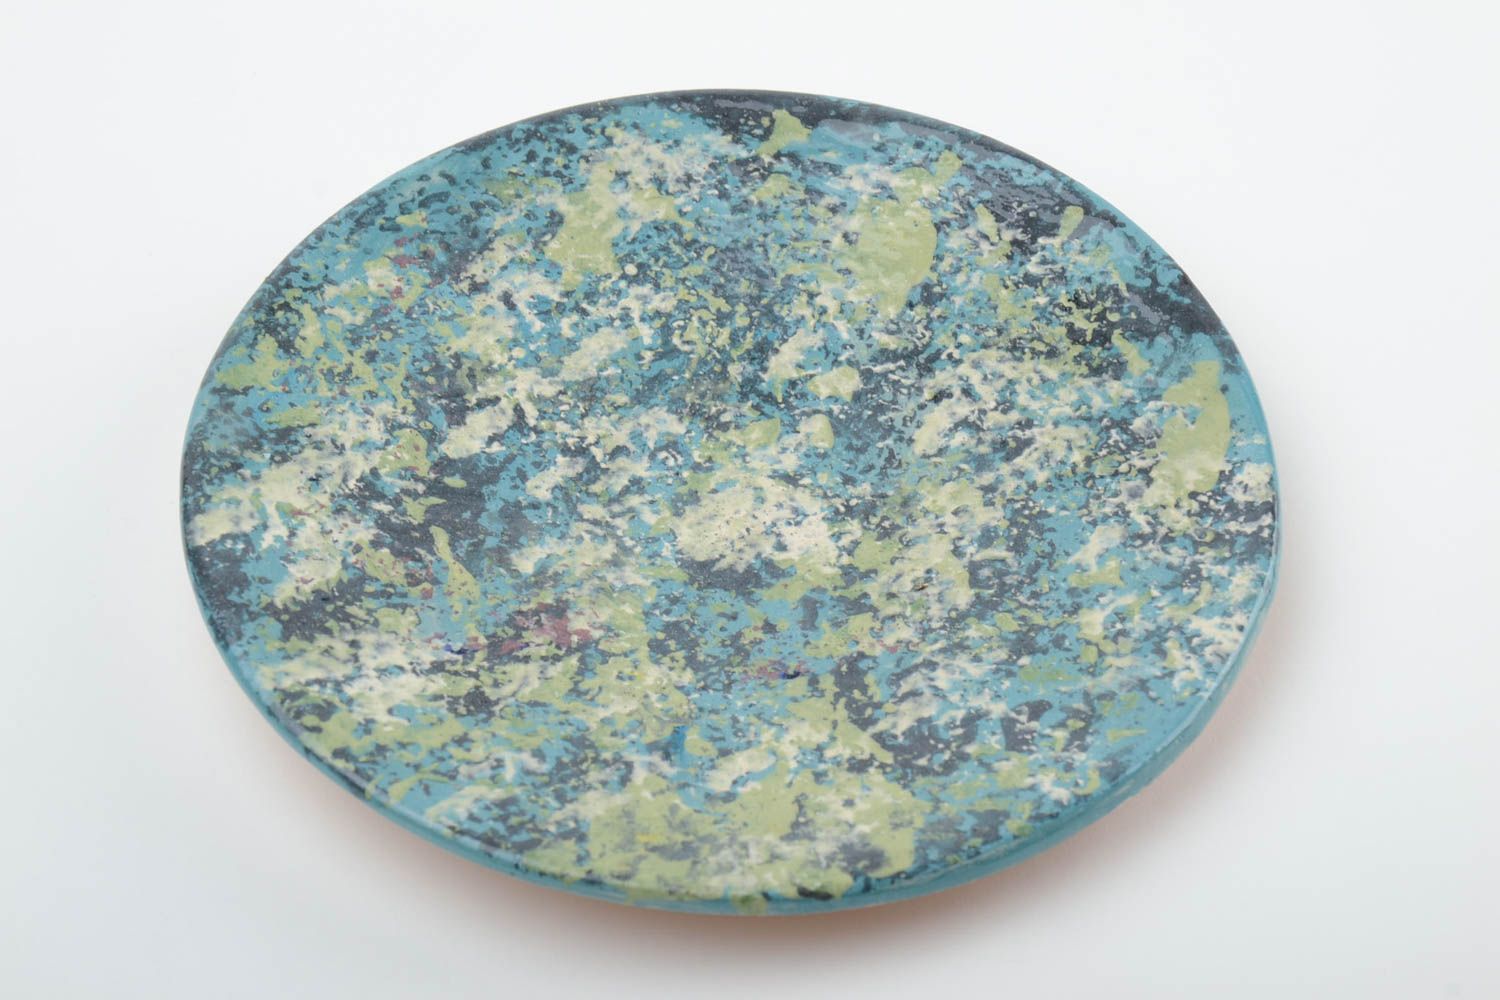 Handmade decorative glazed ceramic saucer in blue and gray color palettes photo 2